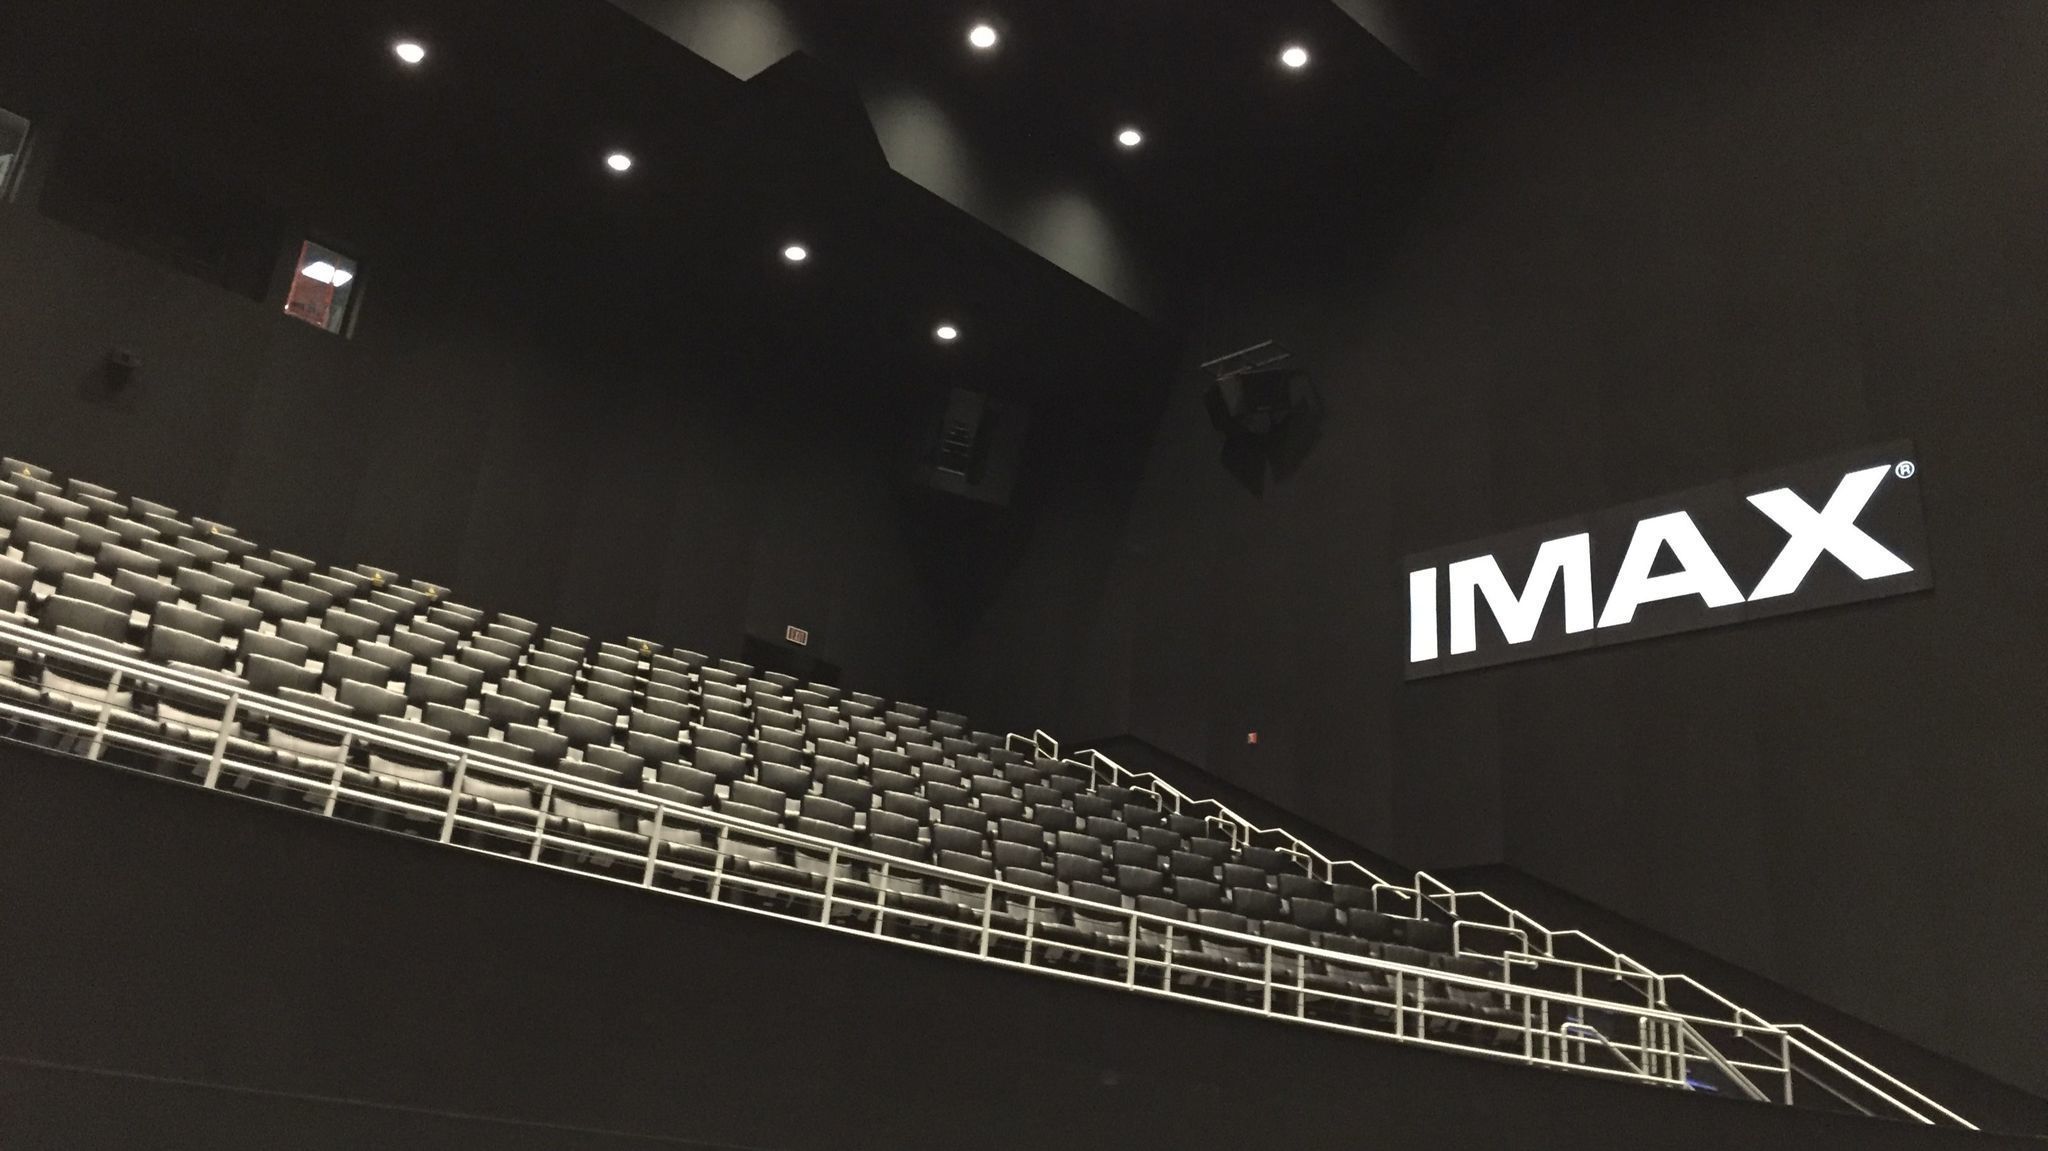 Navy Pier unveils redesigned Imax theater after summer ...